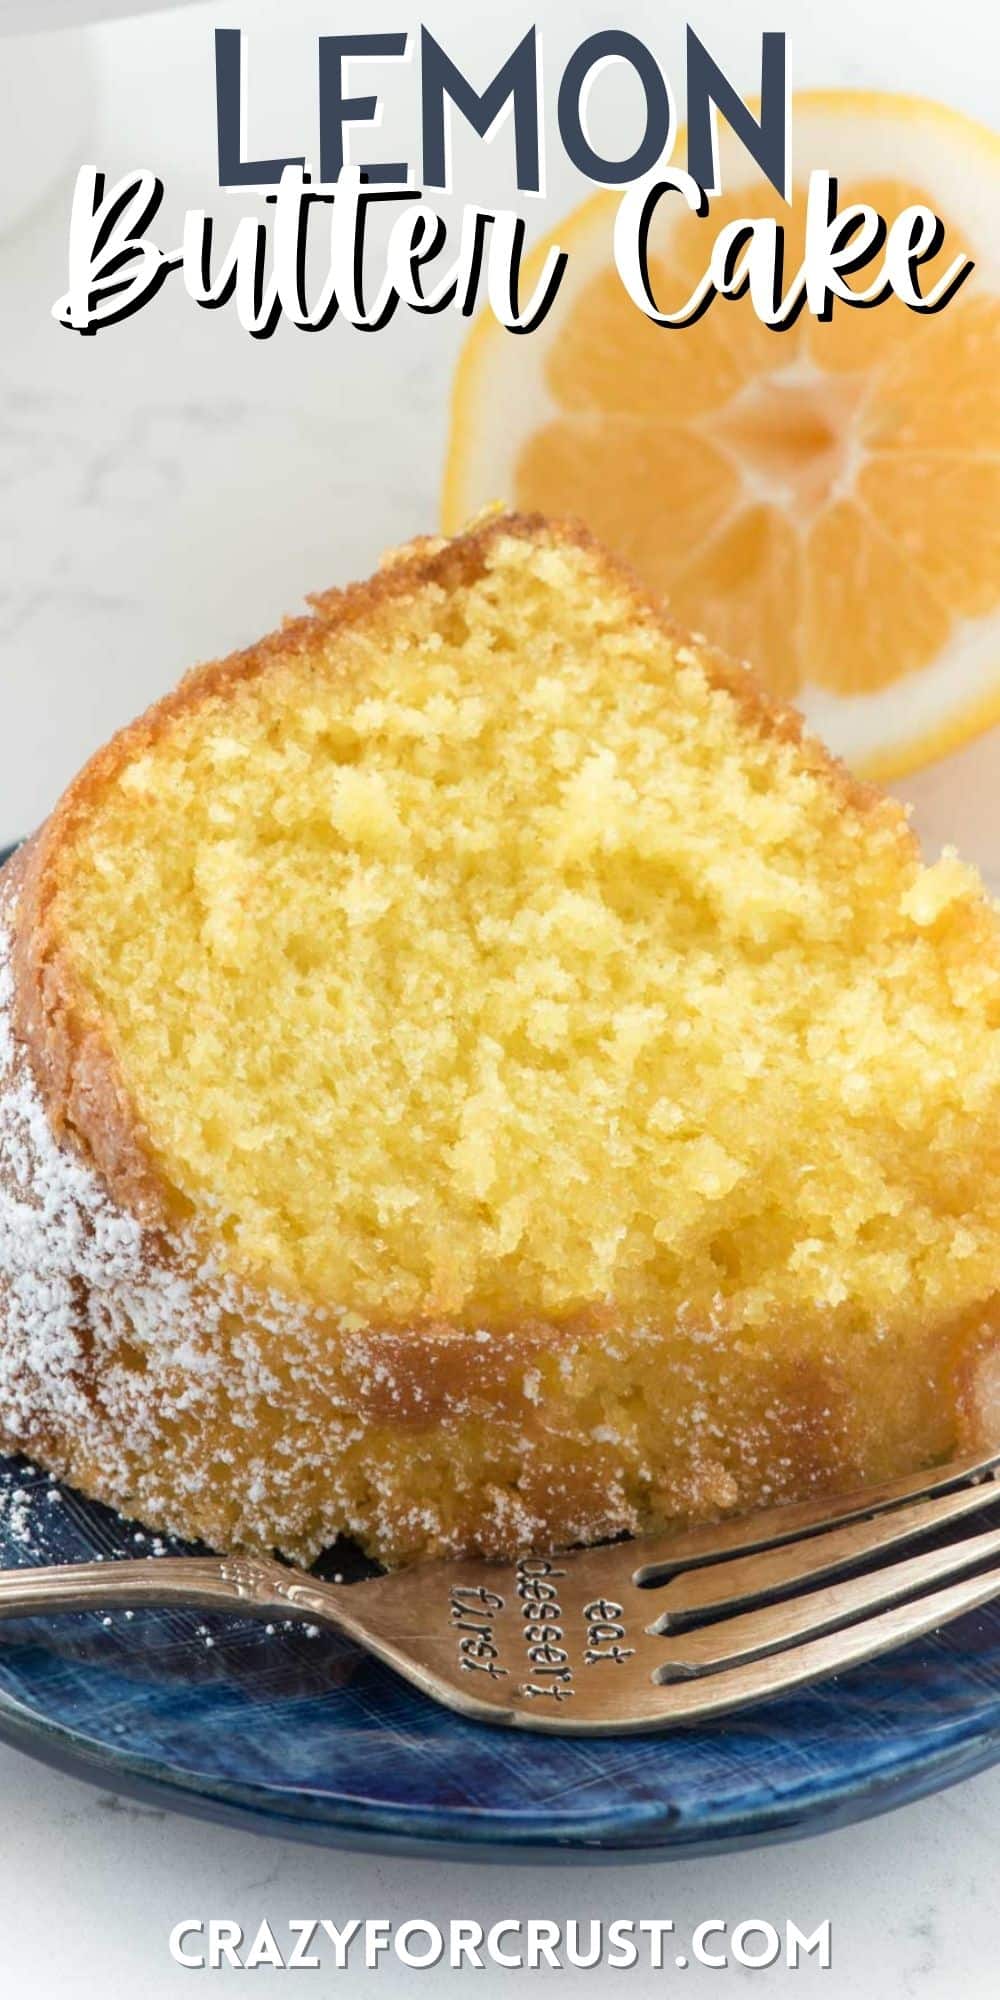 lemon butter cake sitting on a blue plate with lemon around it and words on the photo.